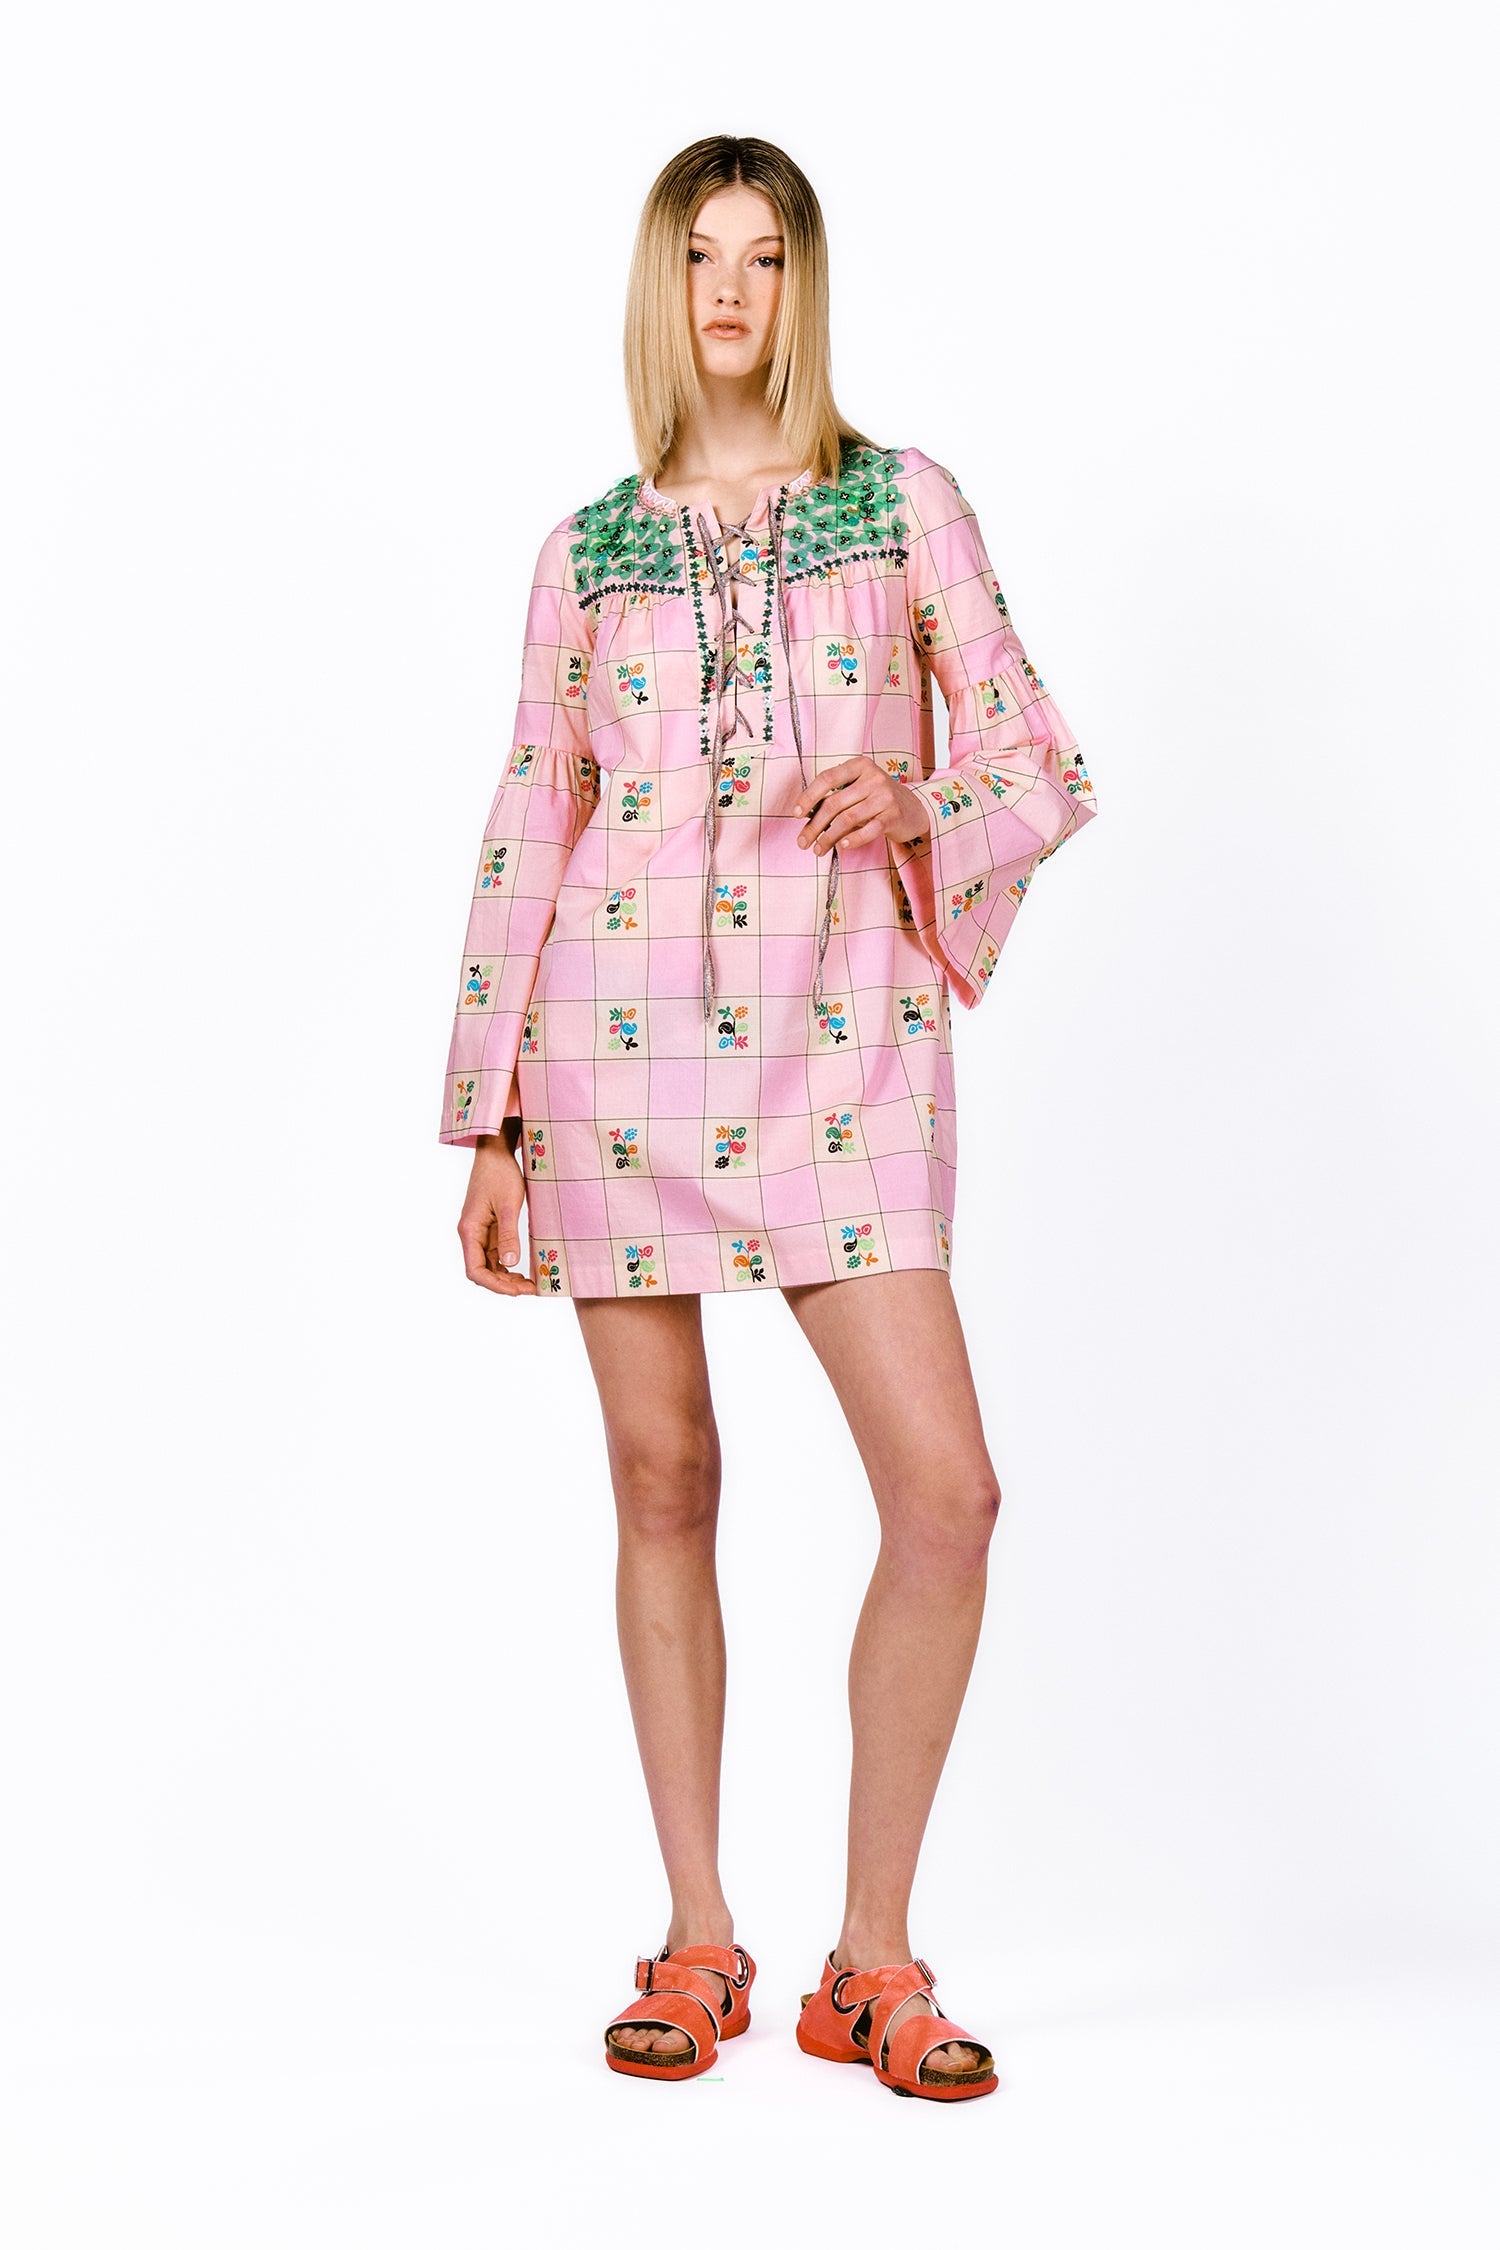 Giant Floral Gingham Embroidered Dress, in pink with green floral design on shoulders